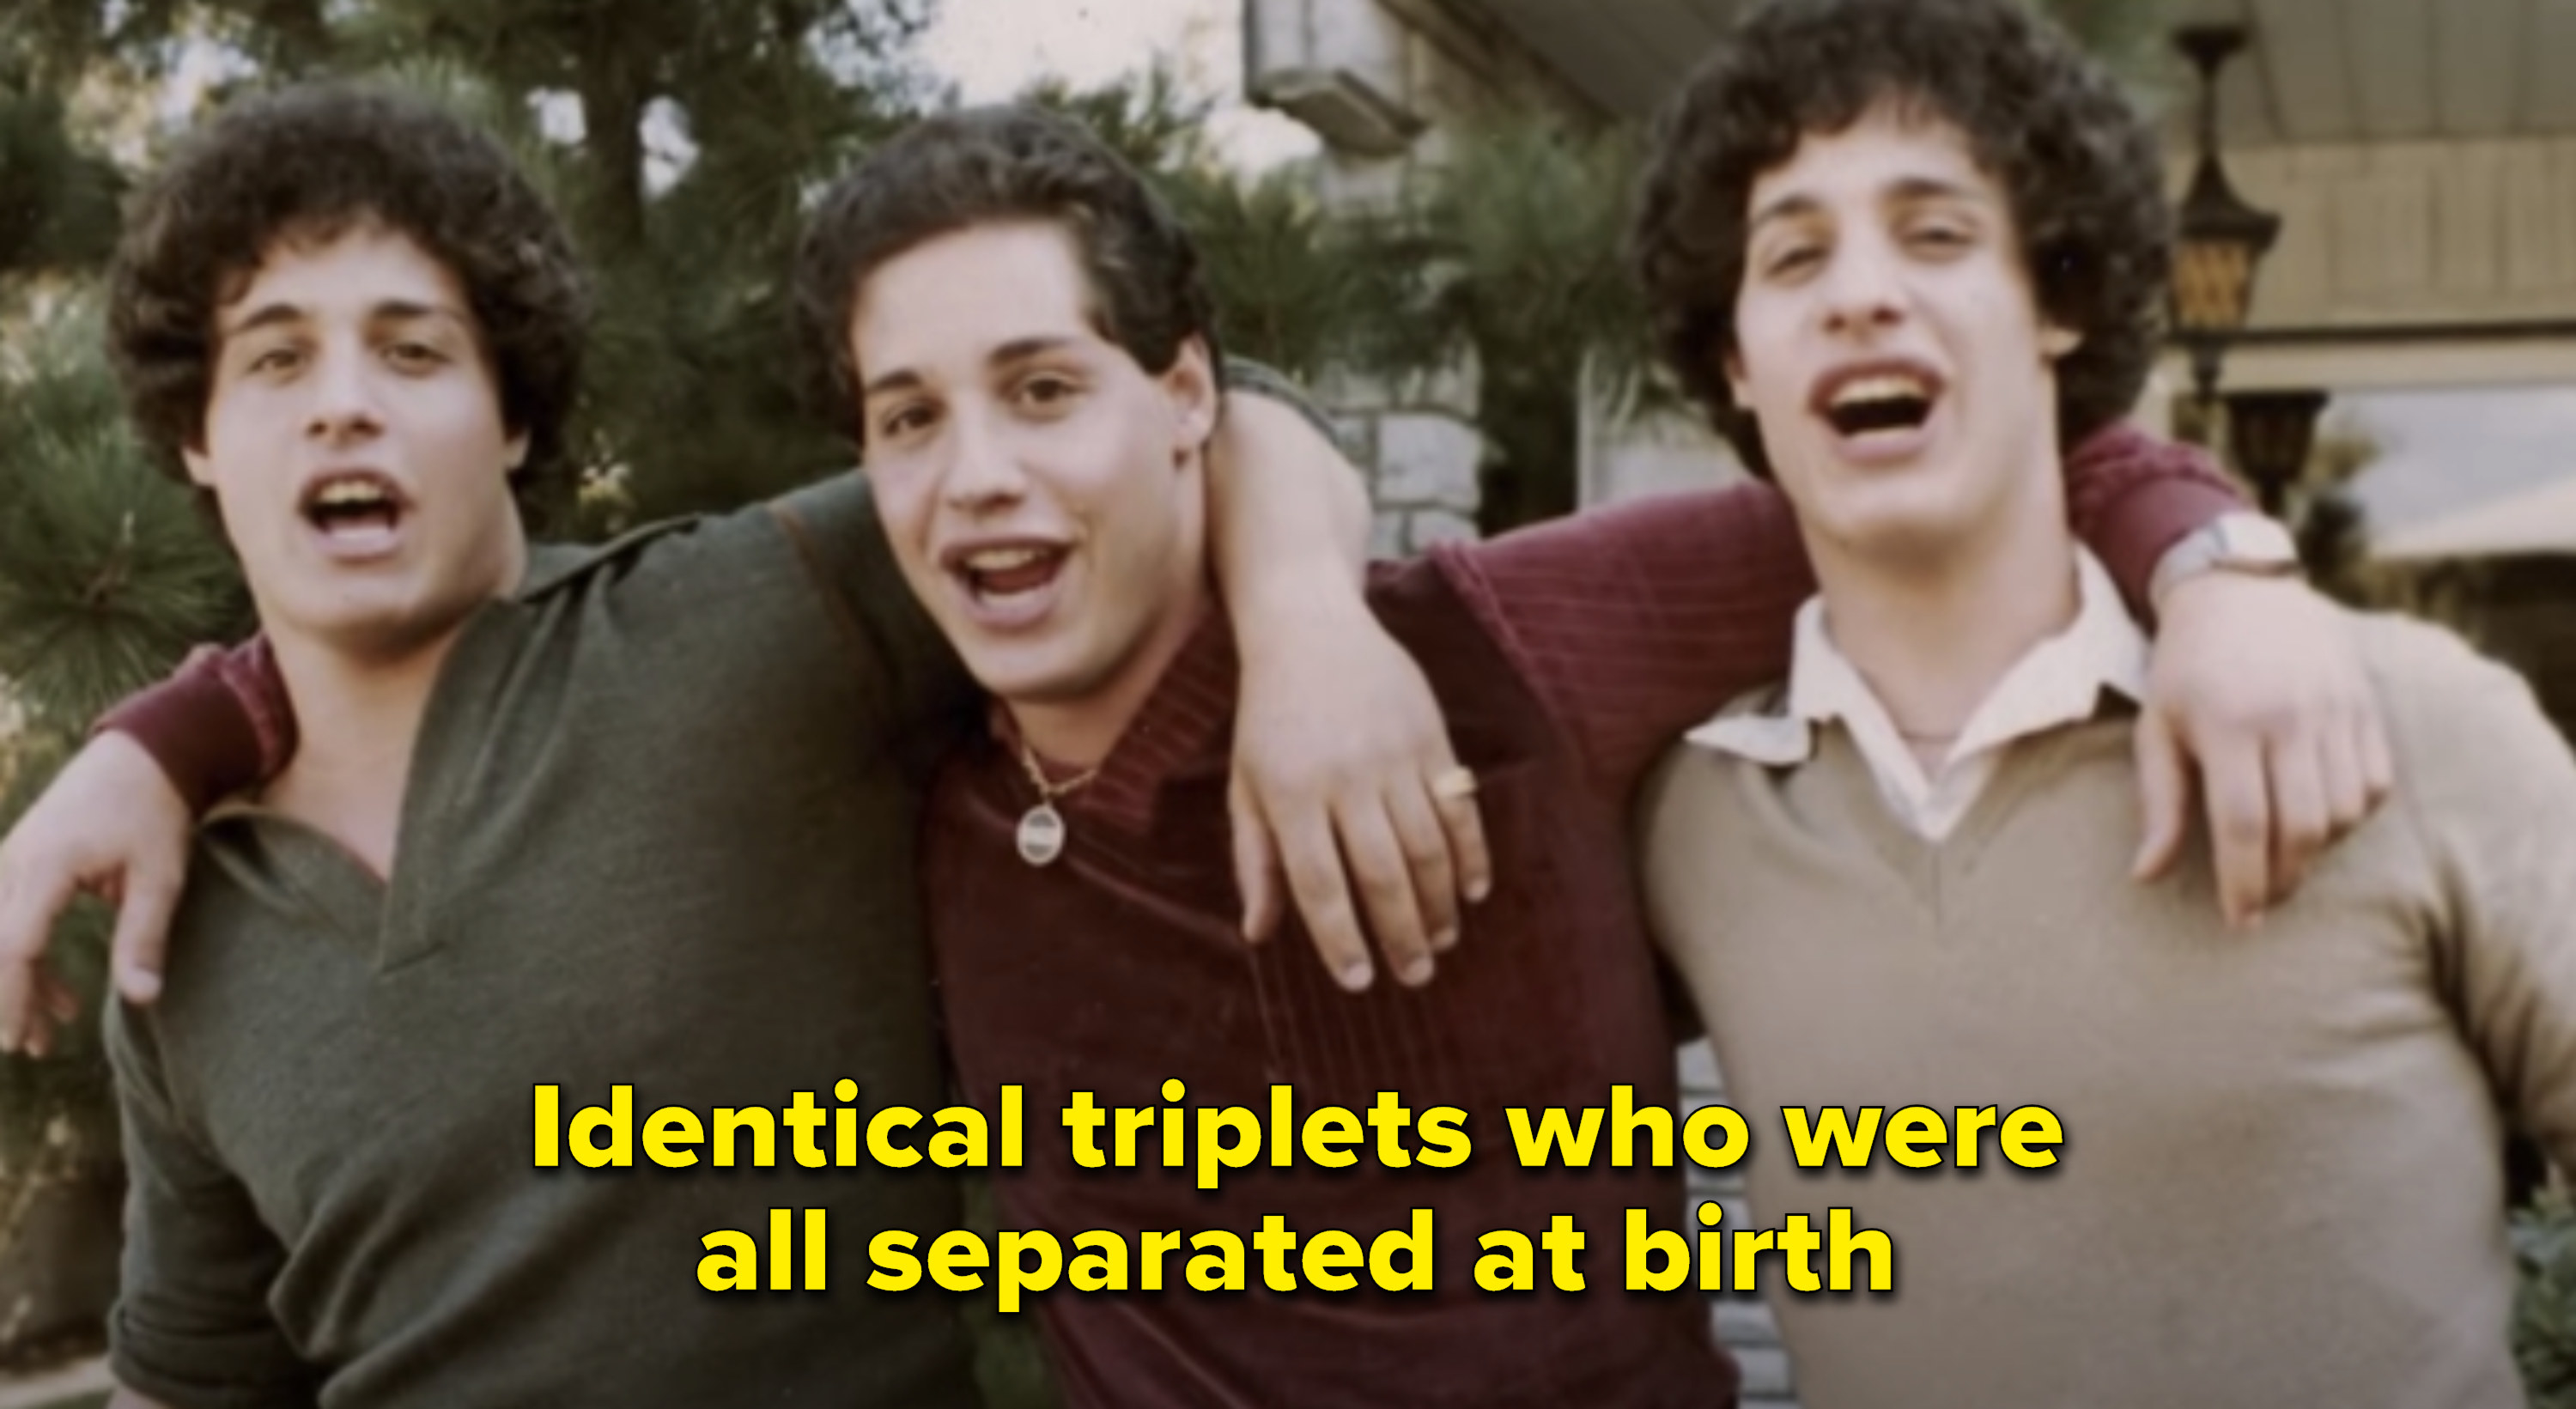 Bobby Shafran and his two brothers in their late teens